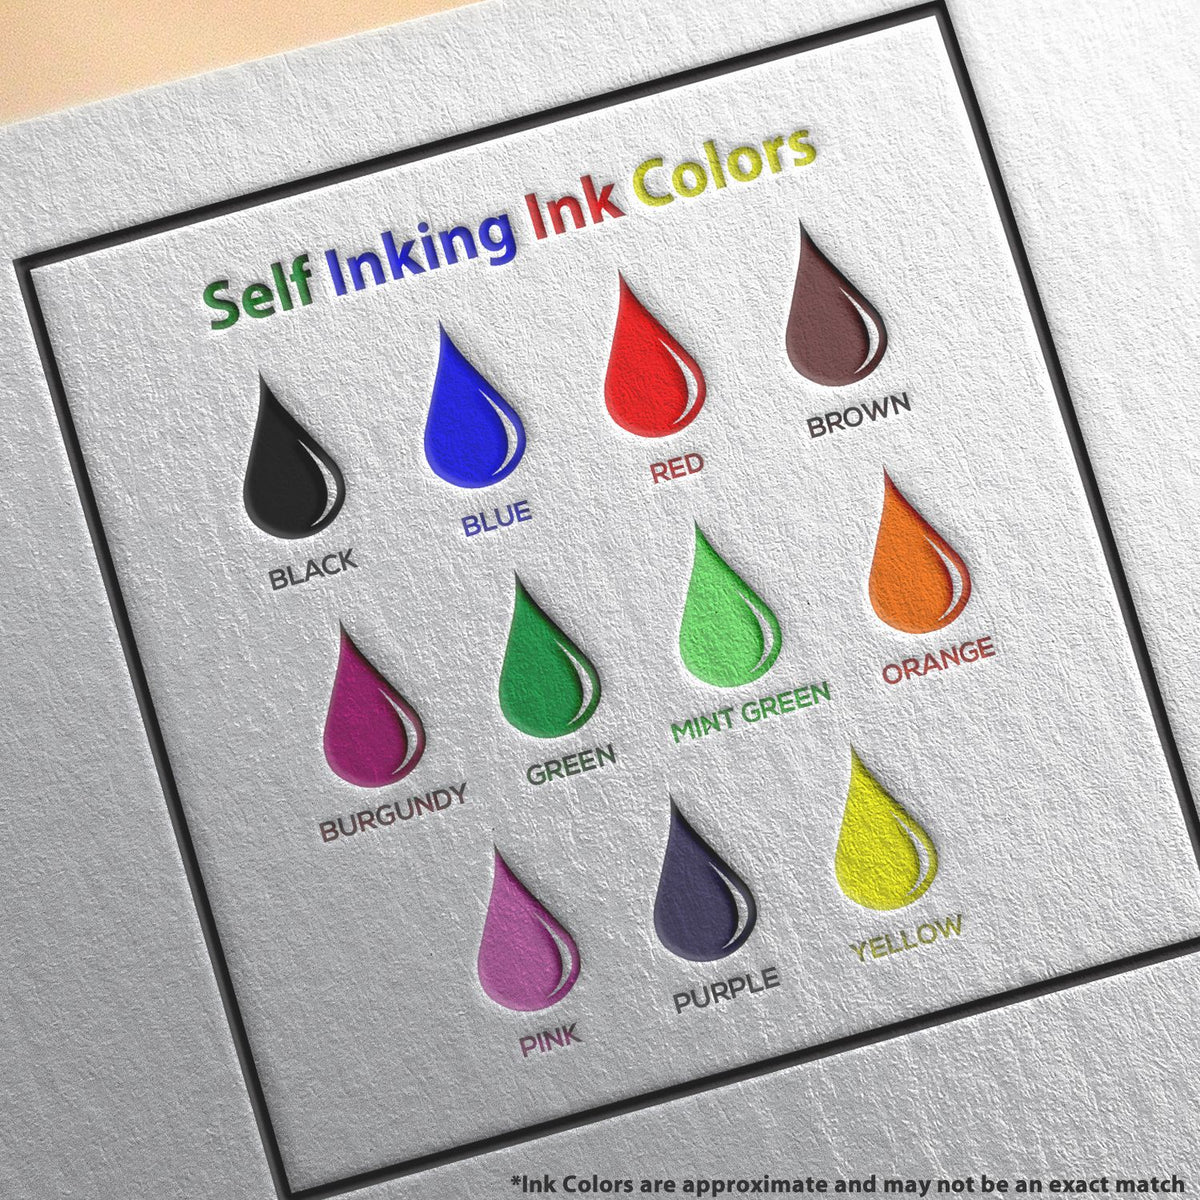 A picture showing the different ink colors or hues available for the Self-Inking District of Columbia Landscape Architect Stamp product.